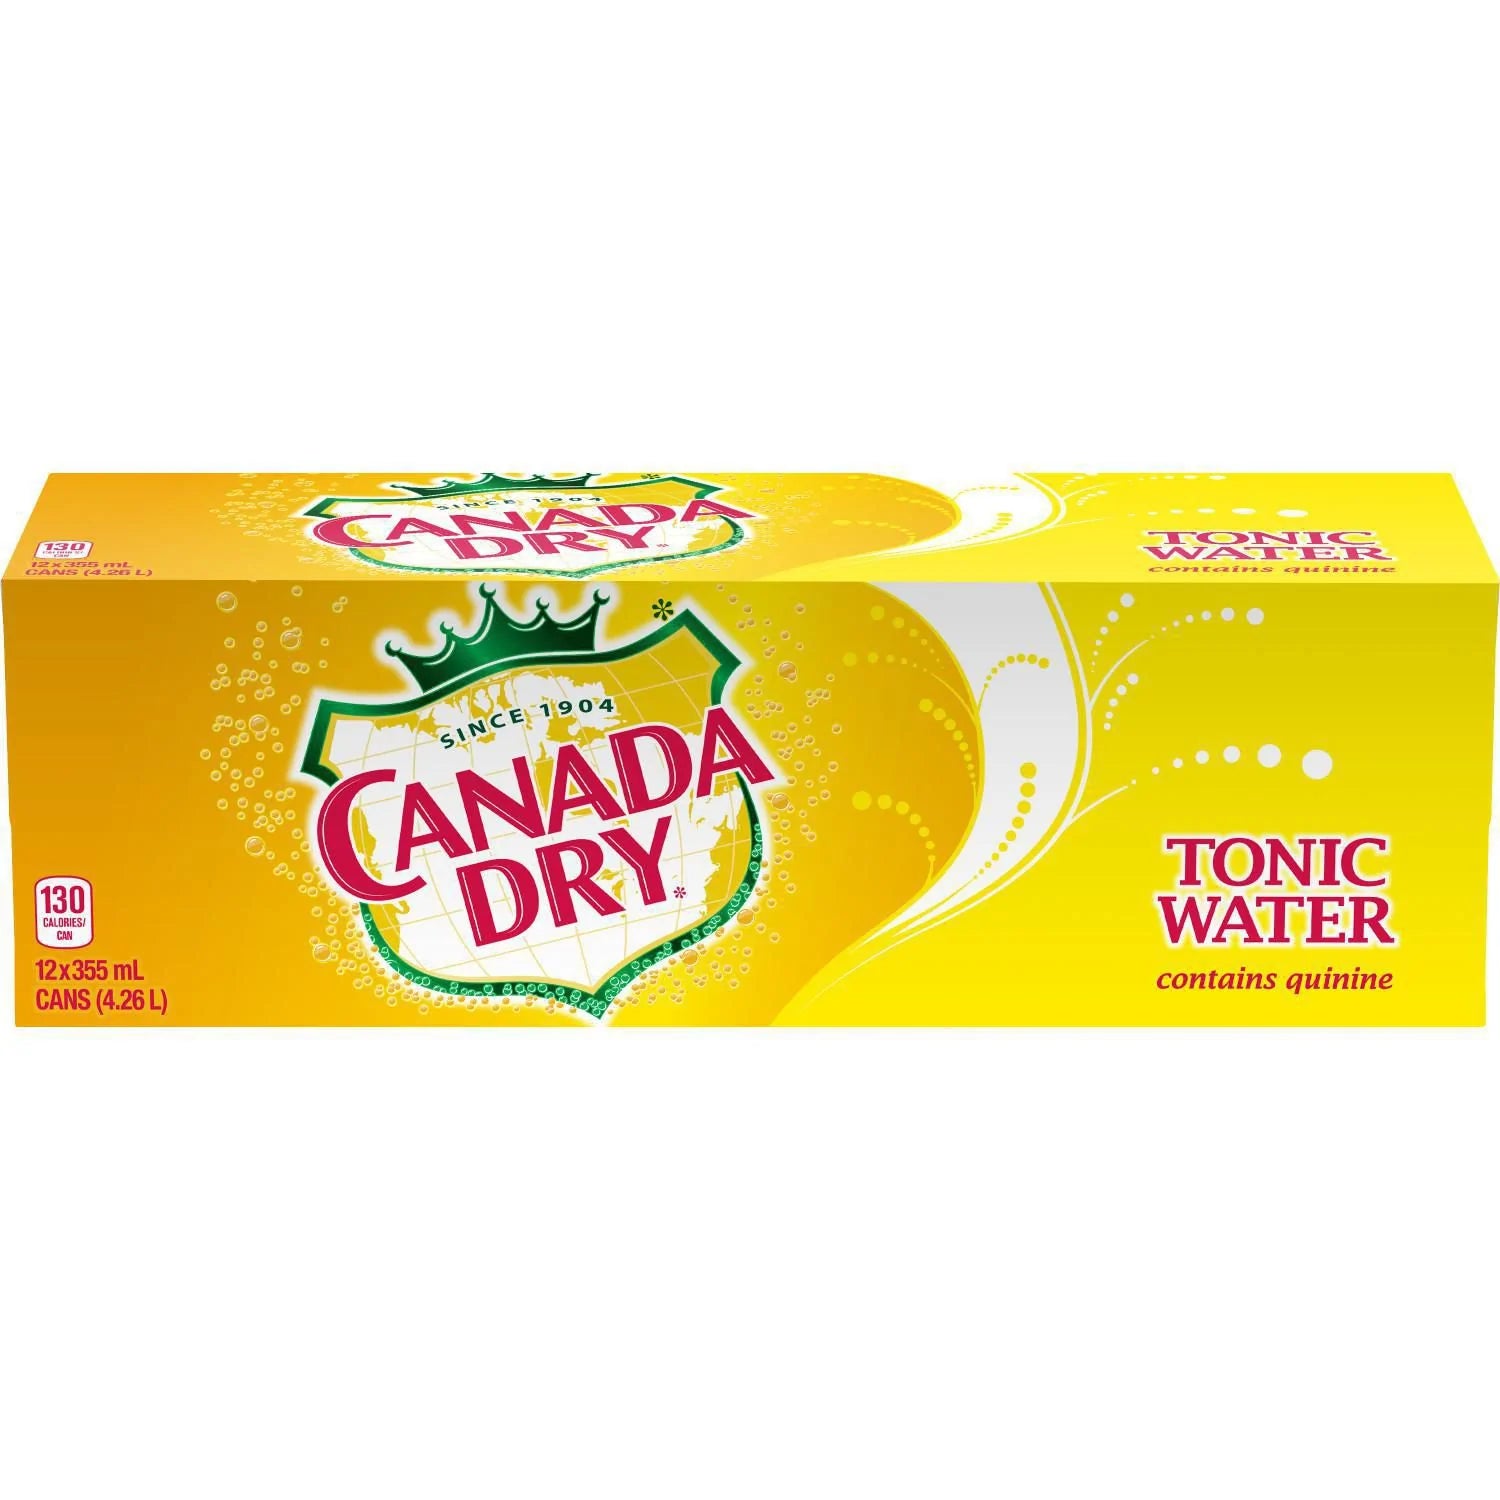 CANADA DRY TONIC WATER 355ML 12CANS